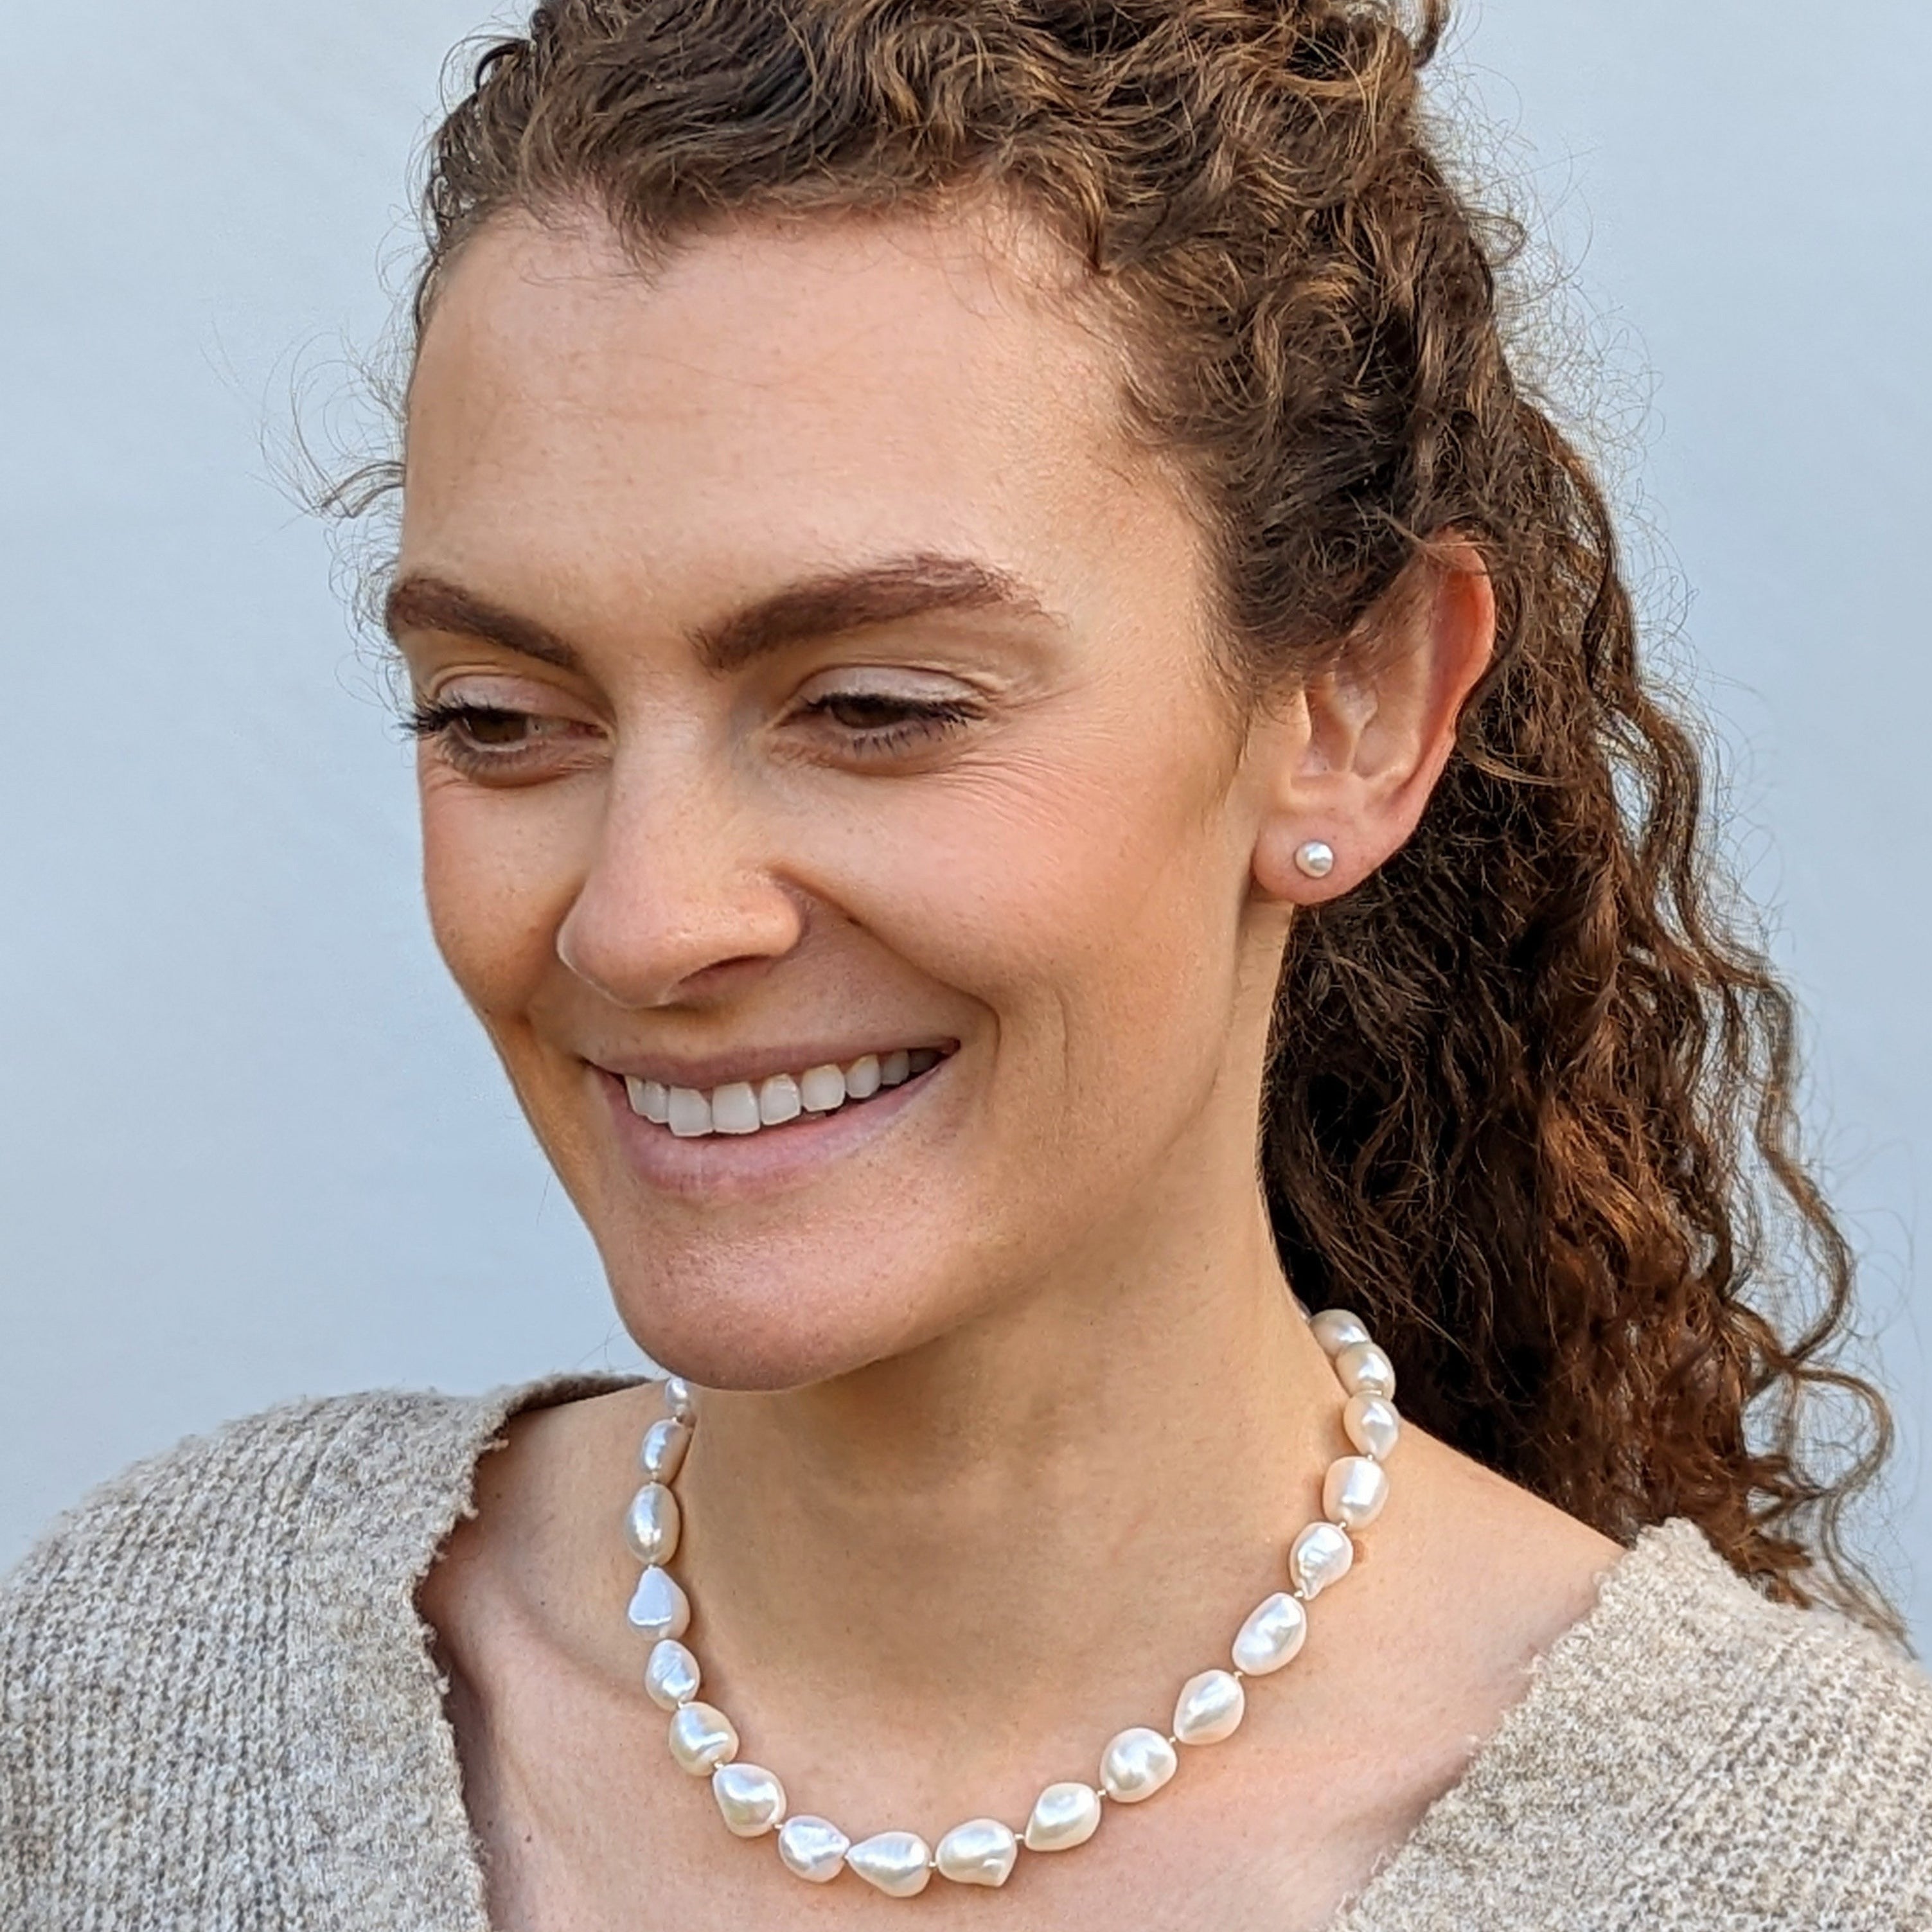 Curly hair model wearing chunky pearl necklace and pearl stud earrings